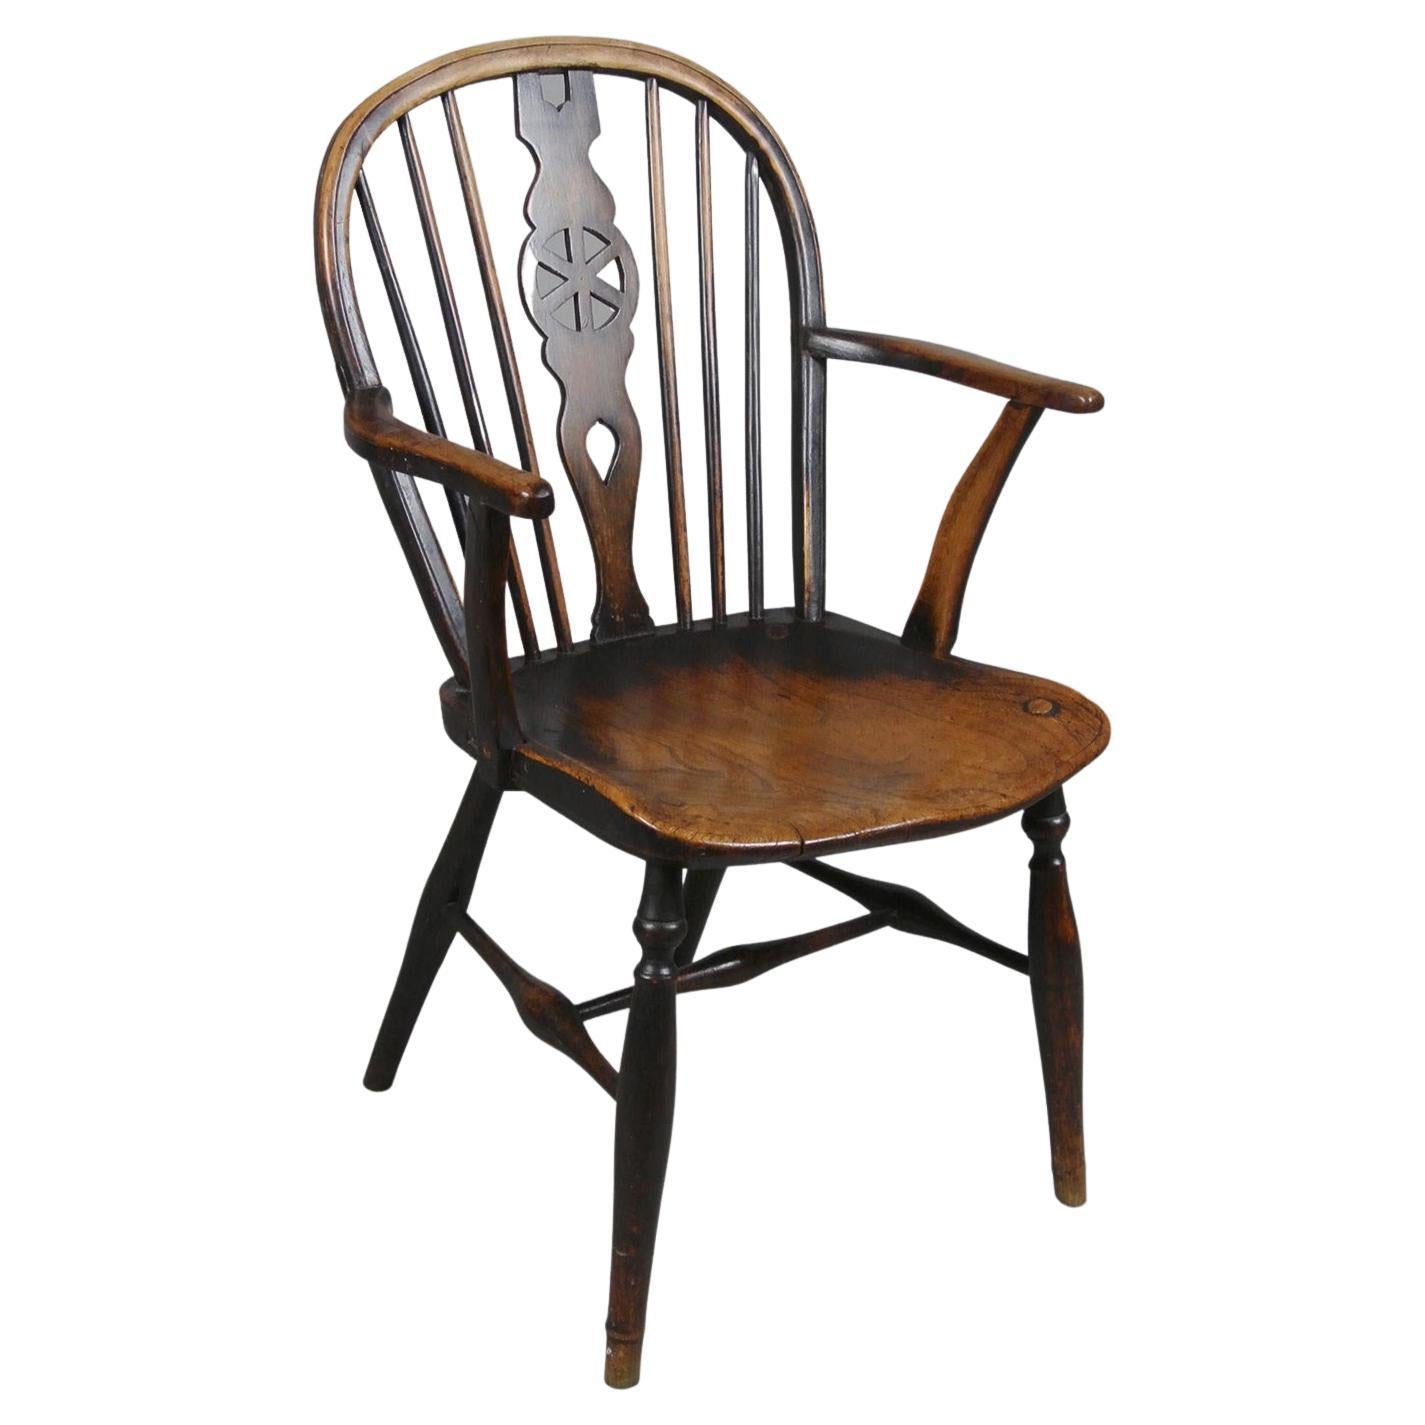 All Original 18th Century High Wycombe Windsor Chair with Fabulous Colour For Sale